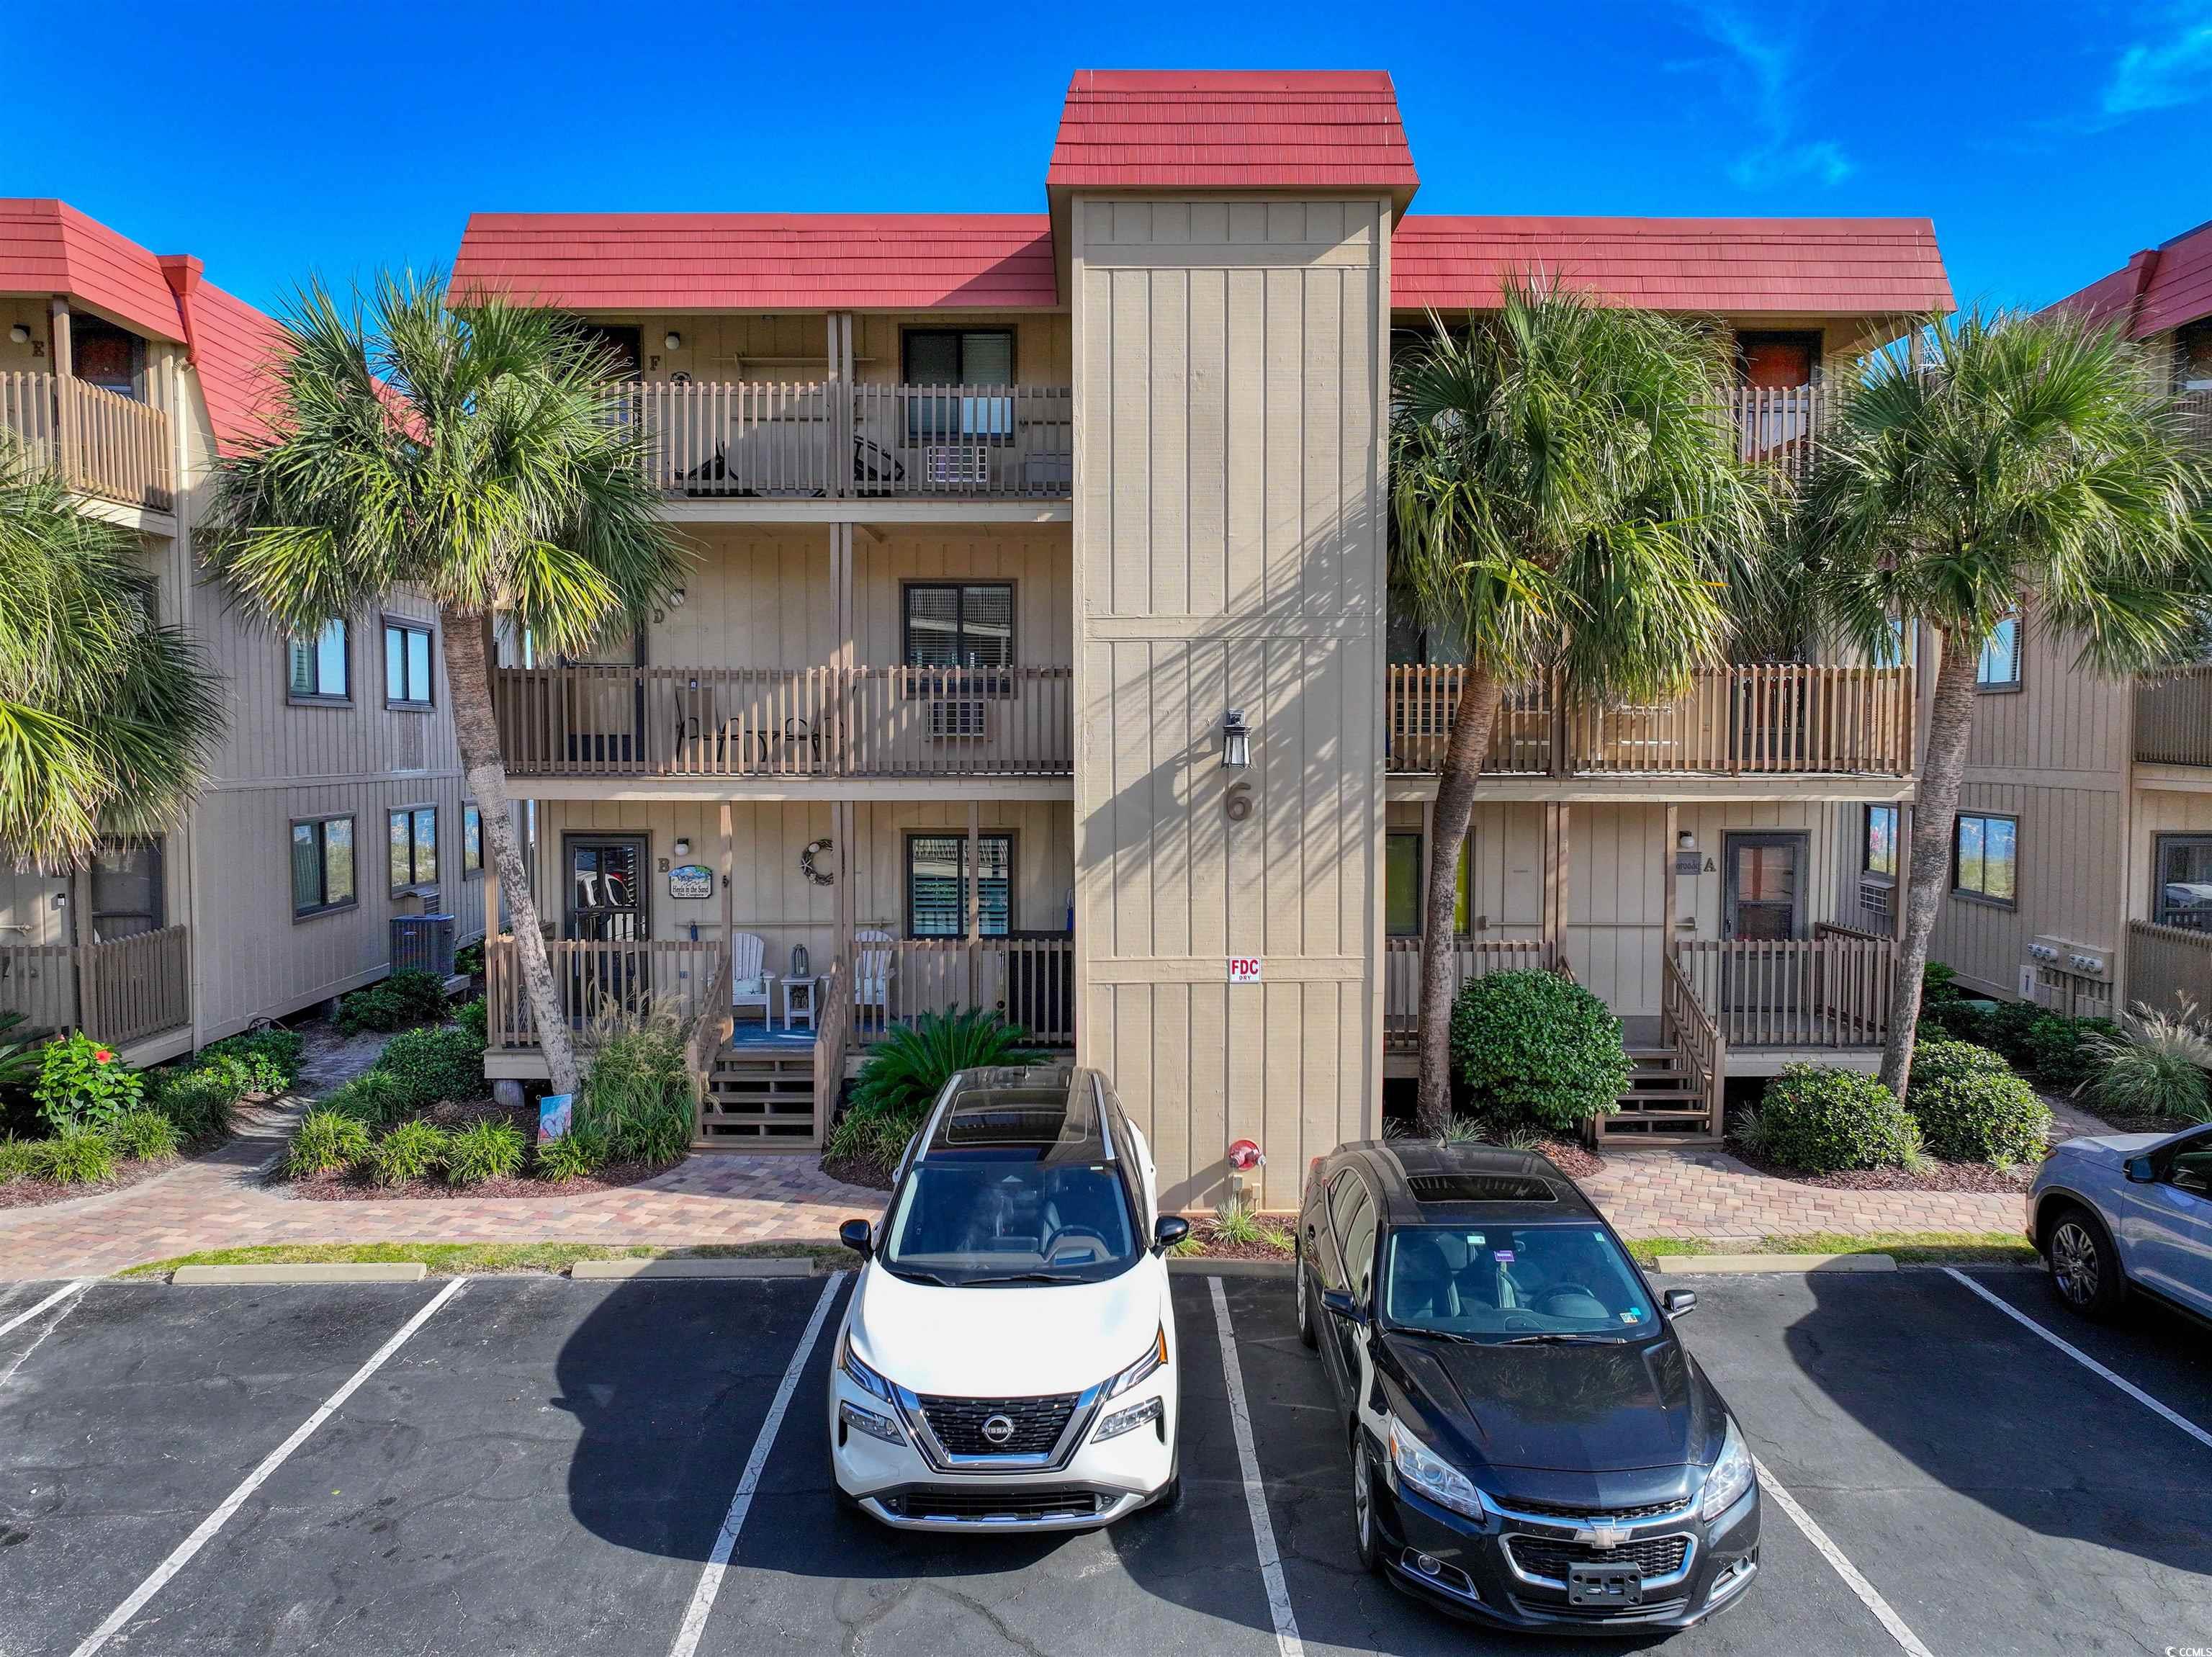 don't miss this extremely rare opportunity to own this fully furnished, first floor- 2 bedroom, 2 bathroom condo on the inlet in north myrtle beach. this unit is truly move in or rental ready immediately upon closing. owner occupied, and not currently on a rental program, it has been very well kept & maintained. the entire condo was completely renovated down to the studs approx 5 years ago including windows & appliances, and a new stainless steel hot water heater is less than 2 years old with a lifetime warranty. located in a private, gated community at the point of the cherry grove inlet, this is truly one-of-a-kind property. the entire unit features a luxury plank flooring, top of the line appliances & fixtures, beautifully coordinated furnishings in every room, and so much more. enjoy the views of the inlet from your back porch with stairs leading to the beach access where you can put your chairs and relax, or put a kayak/paddle board in the water and paddle to the ocean. inlet point villas is a highly sought after community with a private pool, community beach & inlet access, tennis courts, round the clock security, and more. located near all of the grand strand's finest dining, shopping, golf, and entertainment attractions, and just steps out your door to the beach. you won't want to miss this. schedule your showing today!